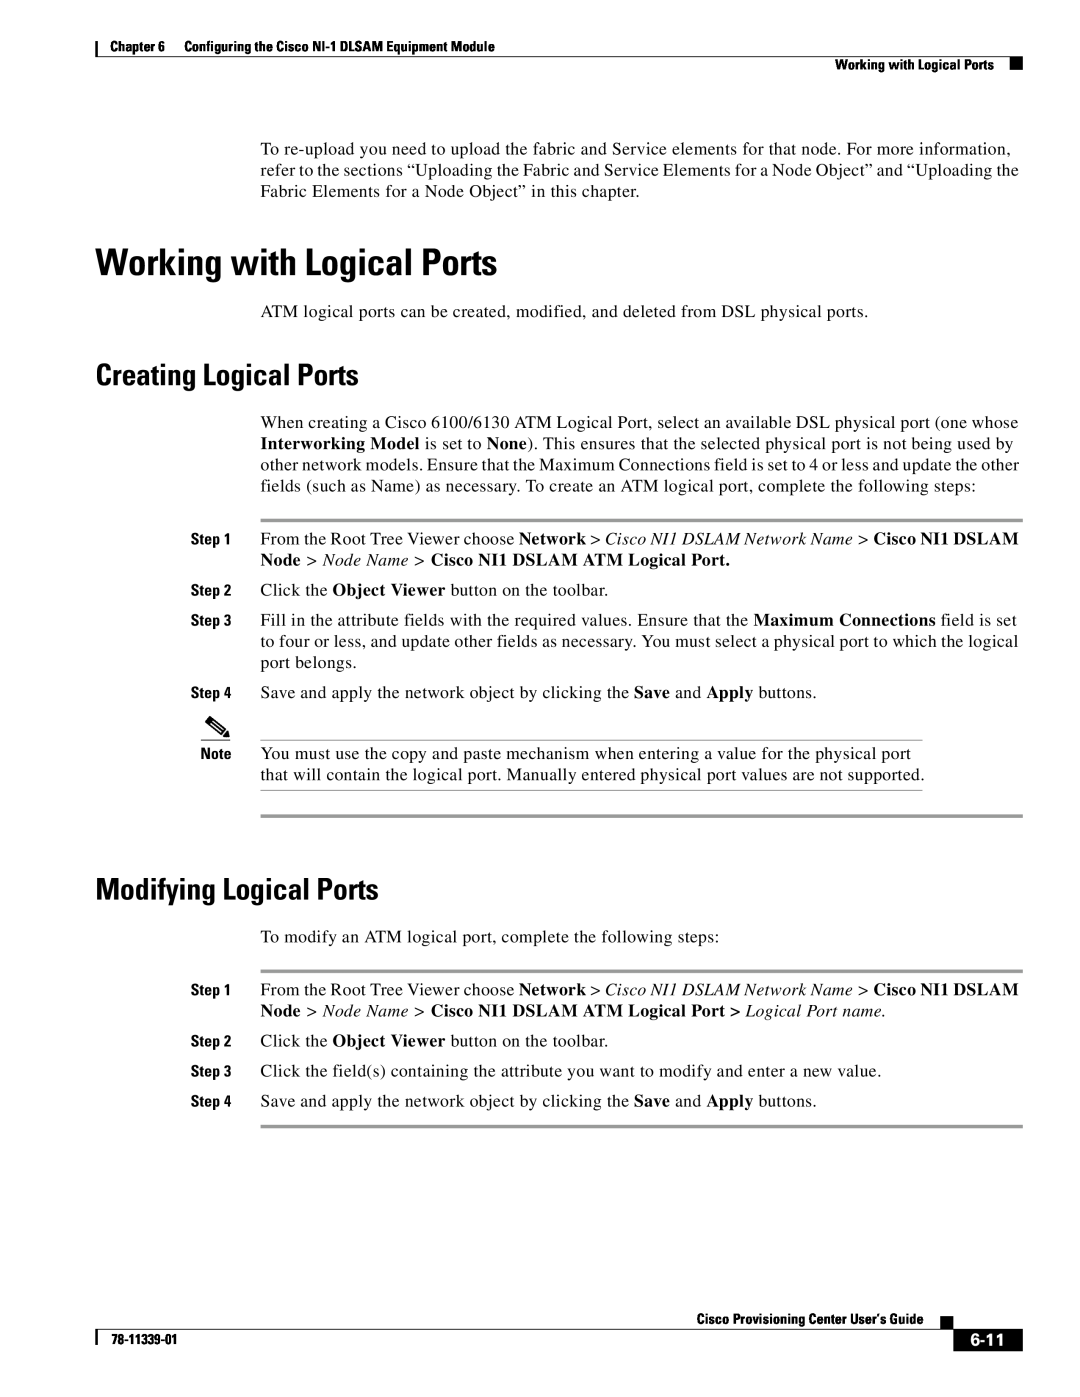 Cisco Systems NI-1 manual Working with Logical Ports, Creating Logical Ports, Modifying Logical Ports, 6-11 